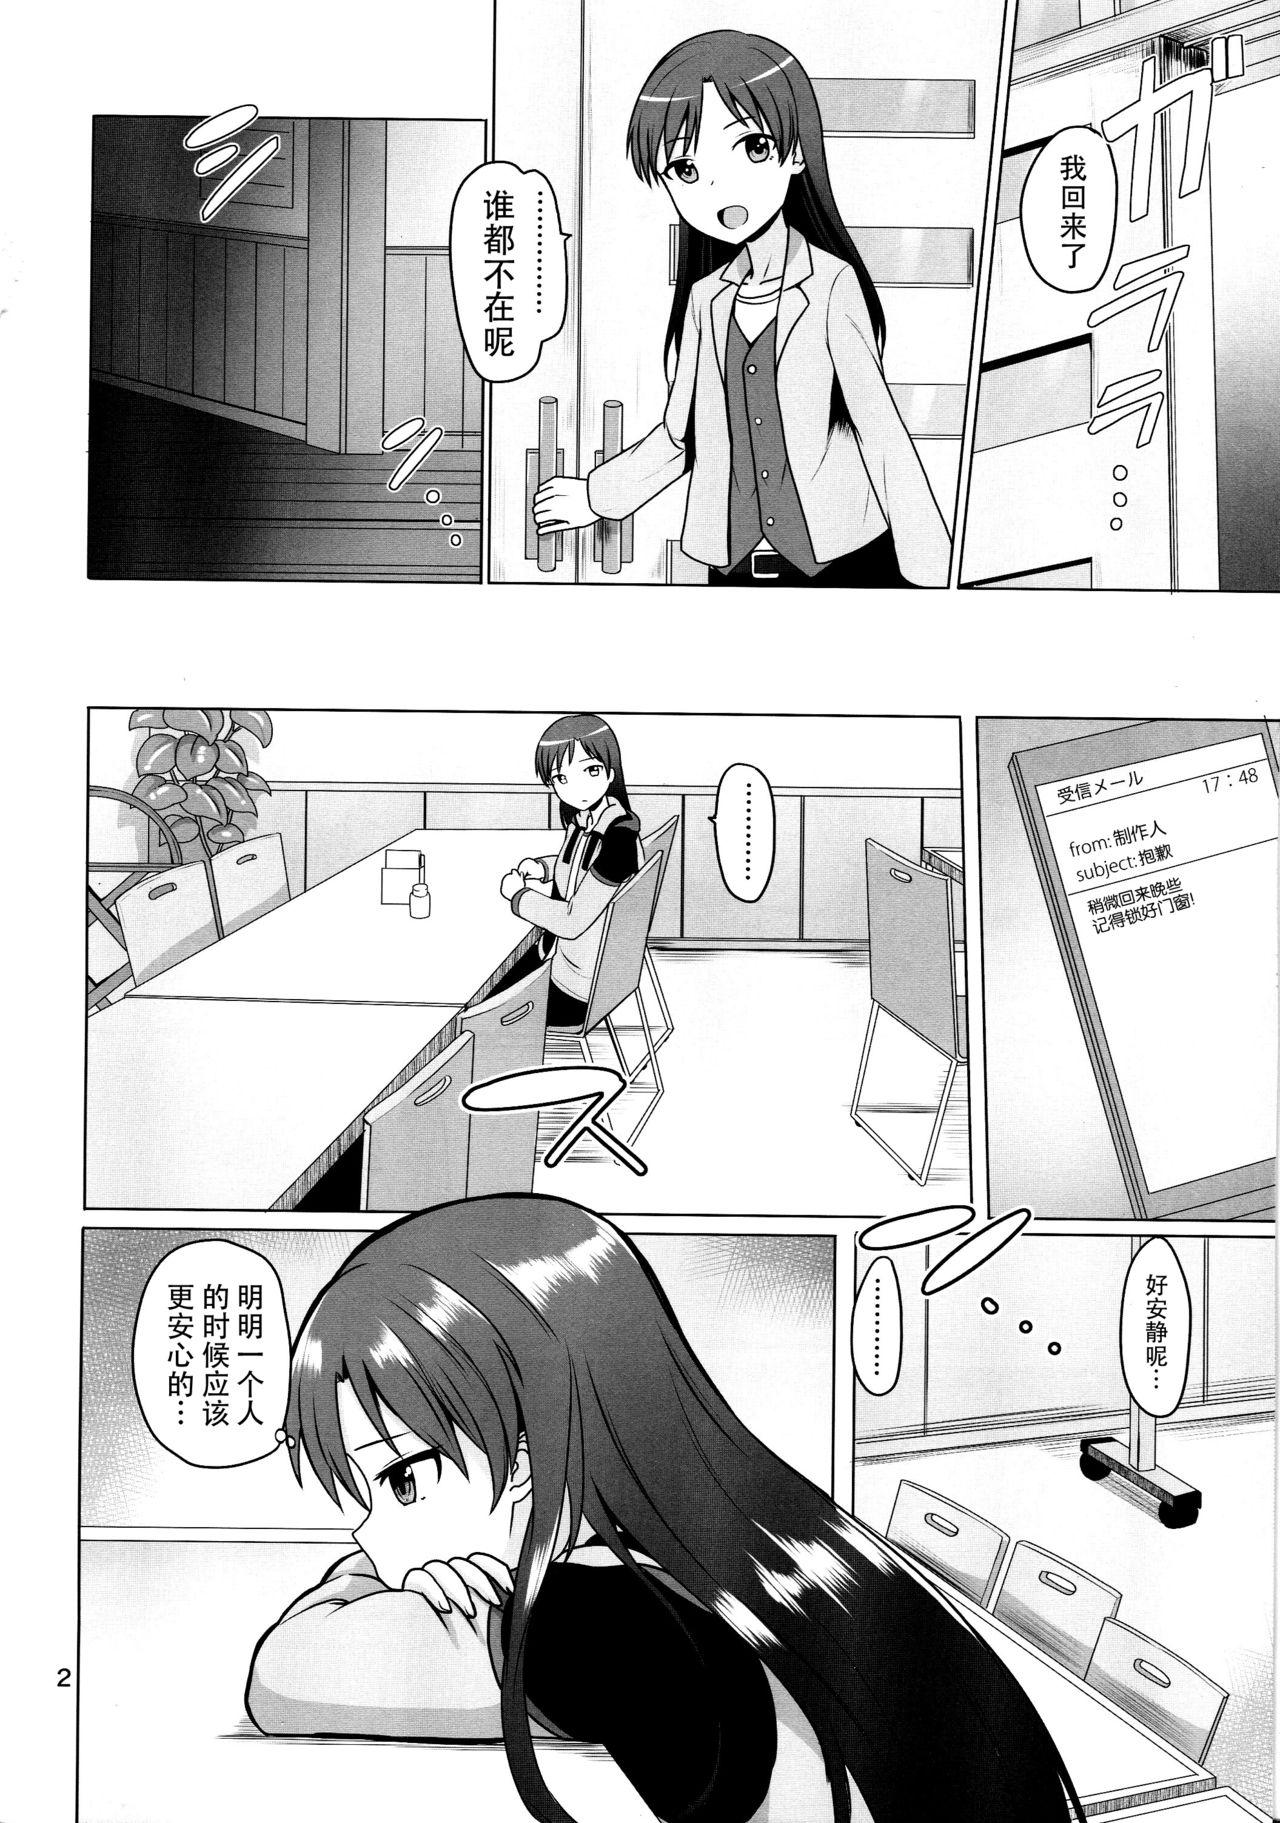 Cams Futari no Ie - The idolmaster Indian - Page 4